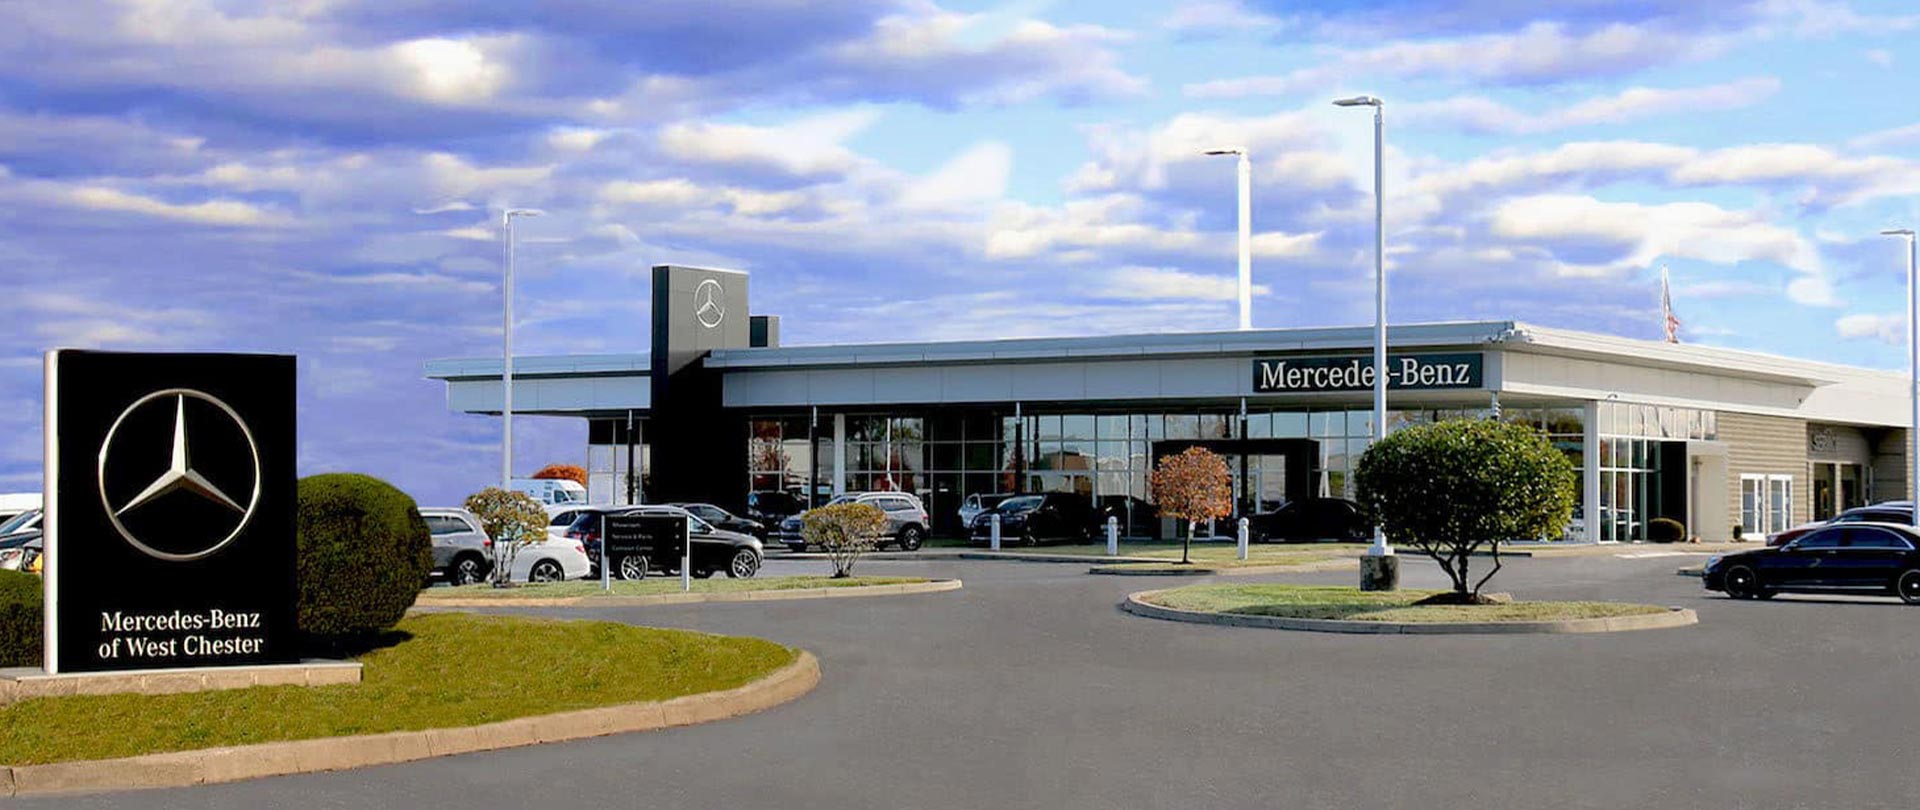 Photograph of the front of the Mercedes-Benz of West Chester dealership and lot.